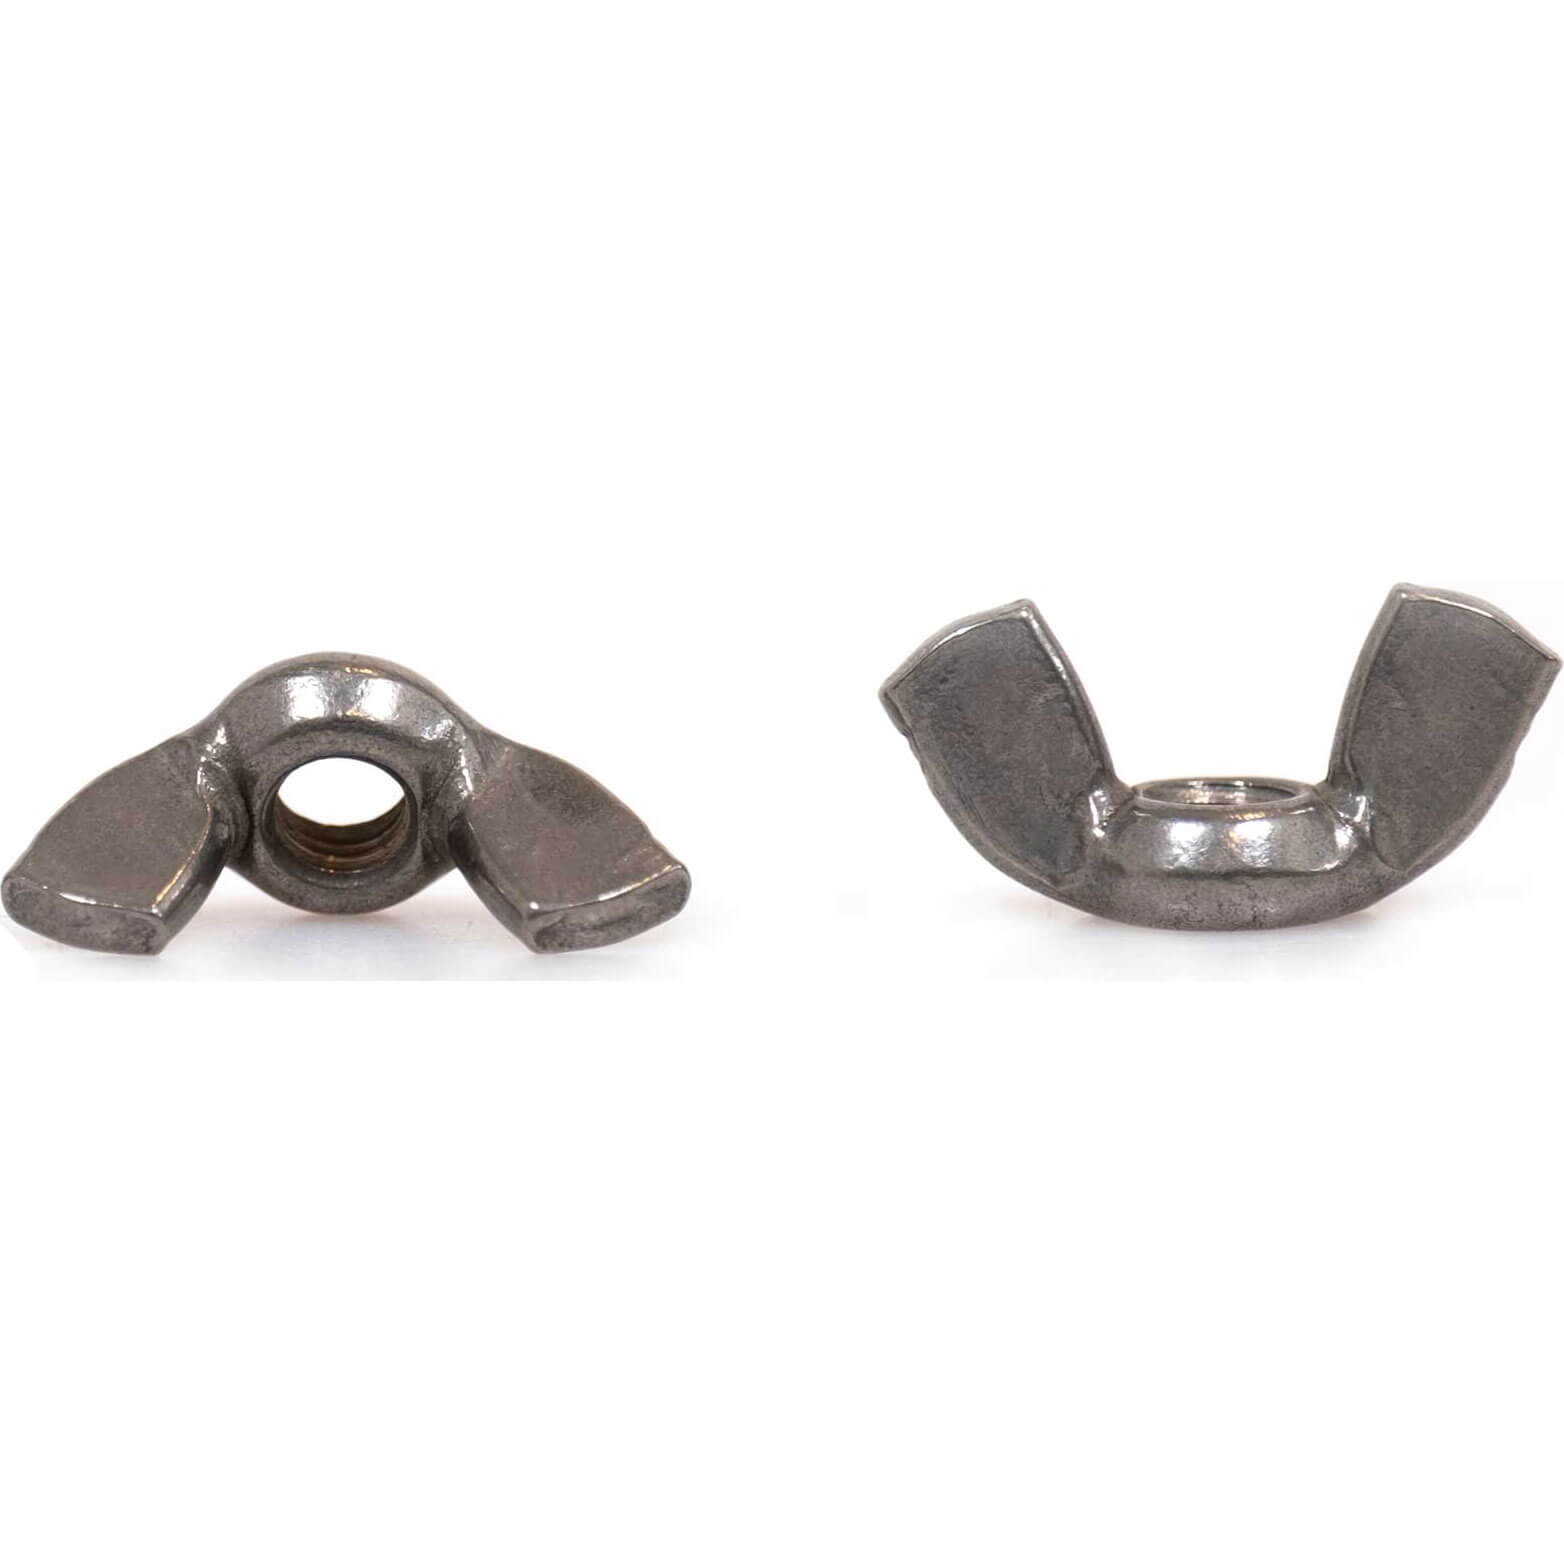 Image of Sirius A4 316 Stainless Steel Wing Nuts M4